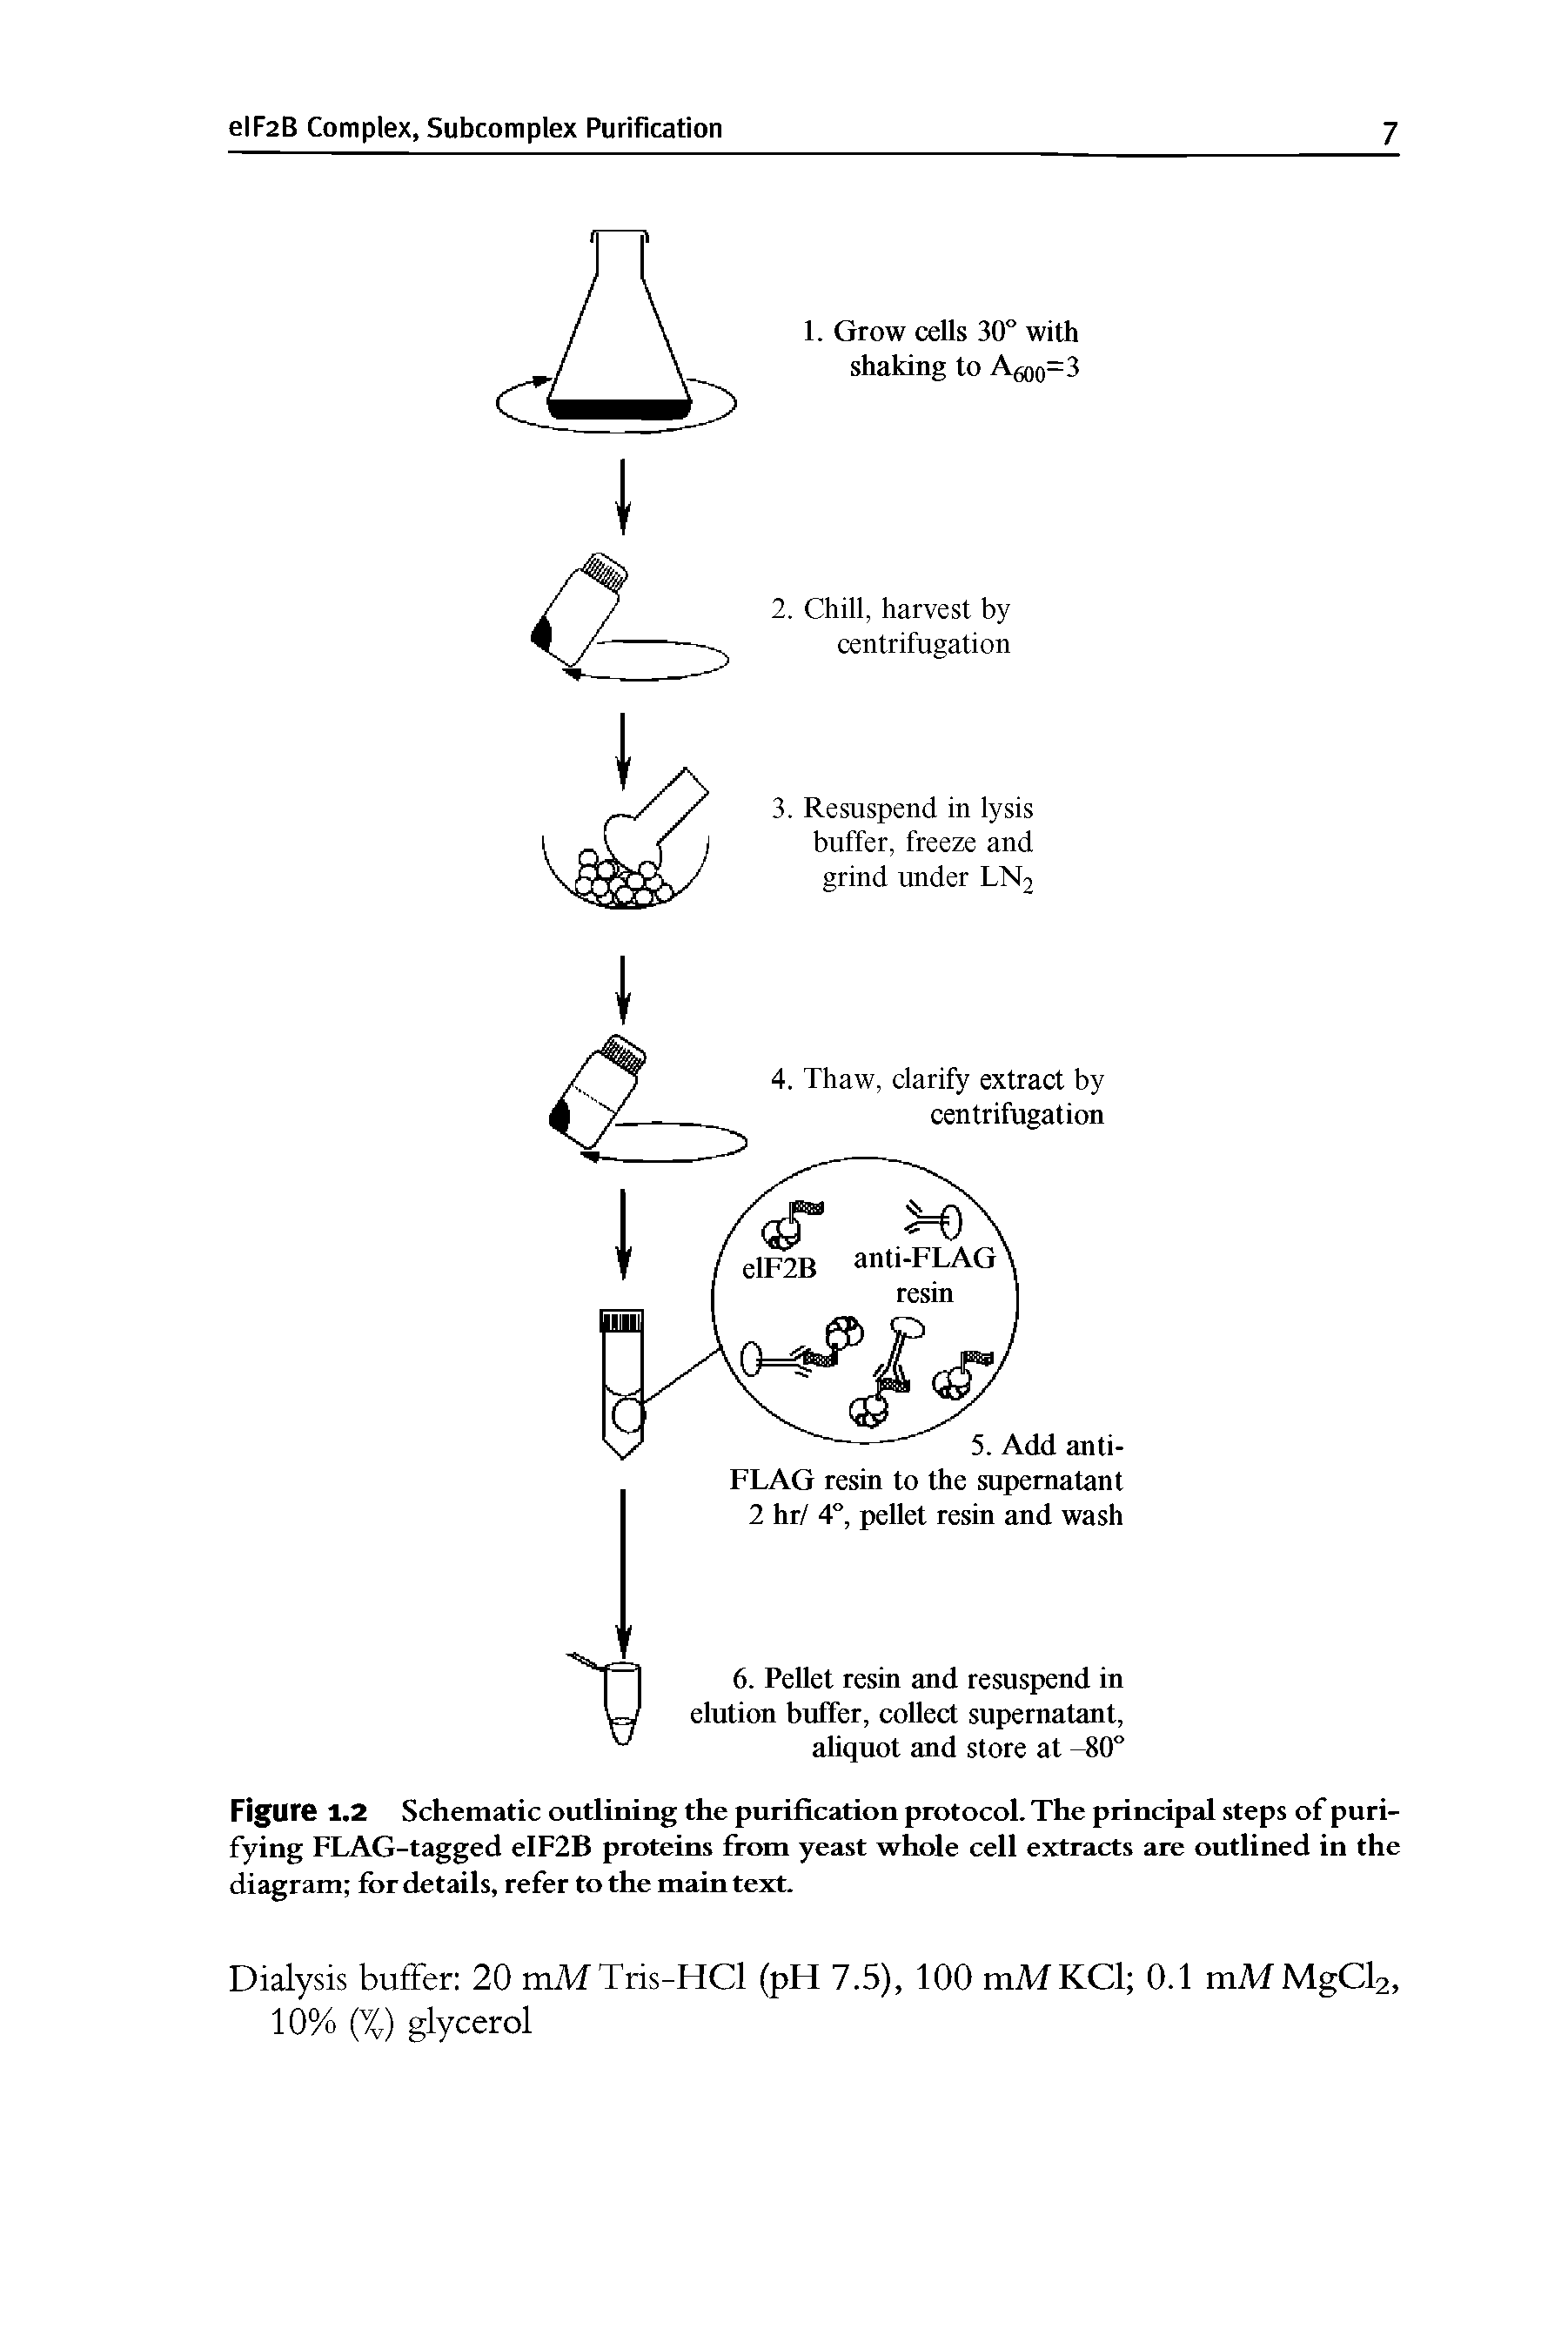 Figure 1.2 Schematic outlining the purification protocol. The principal steps of purifying FLAG-tagged eIF2B proteins from yeast whole cell extracts are outlined in the diagram for details, refer to the main text.